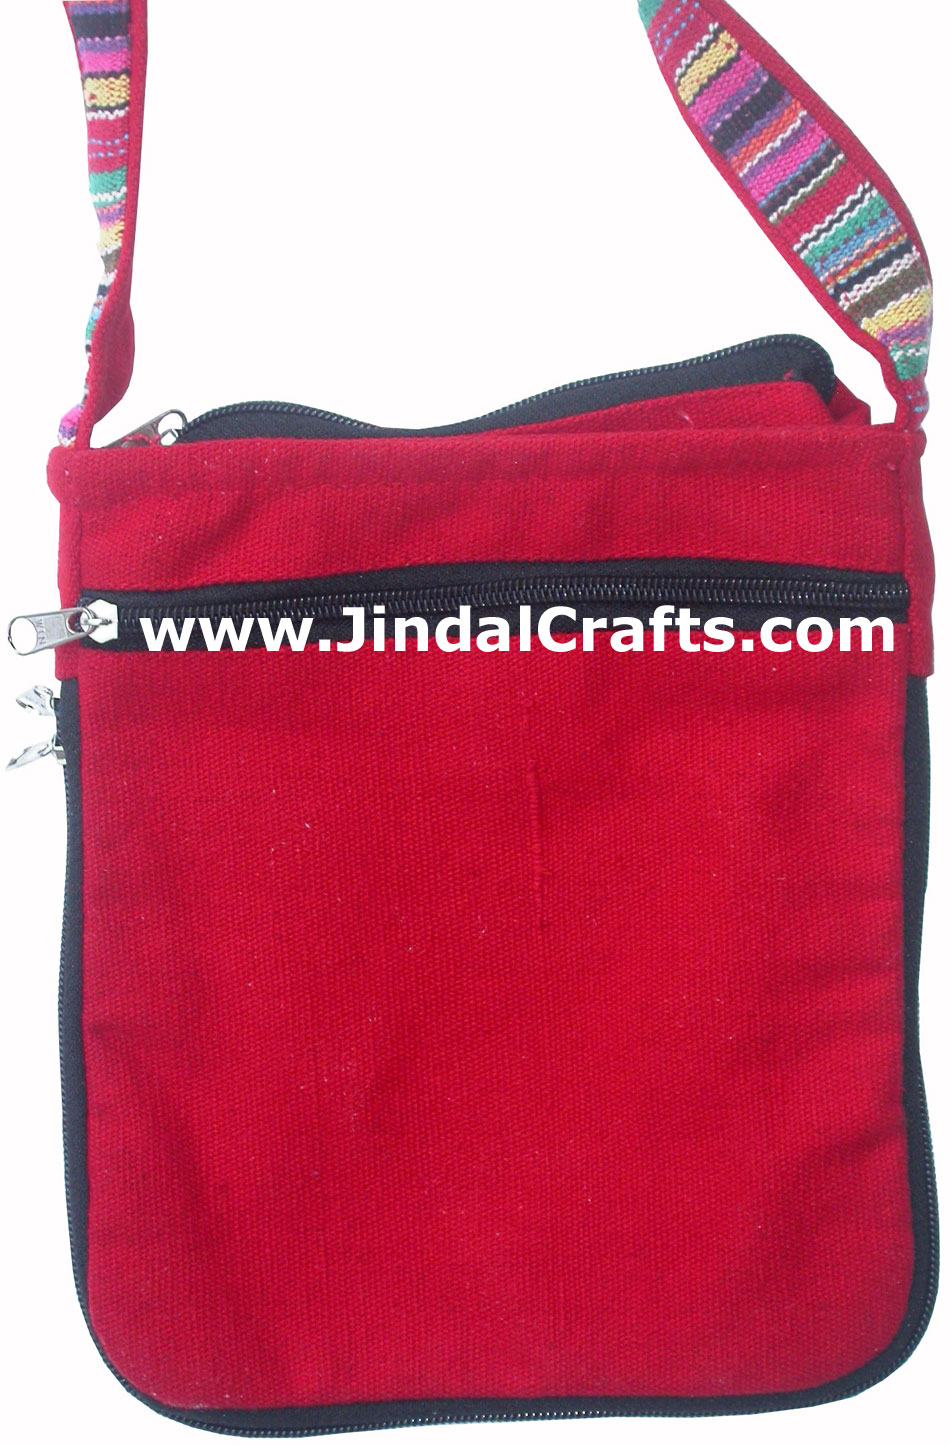 Hand Made Cotton Fabric Traditional Shoulder Handbag from India